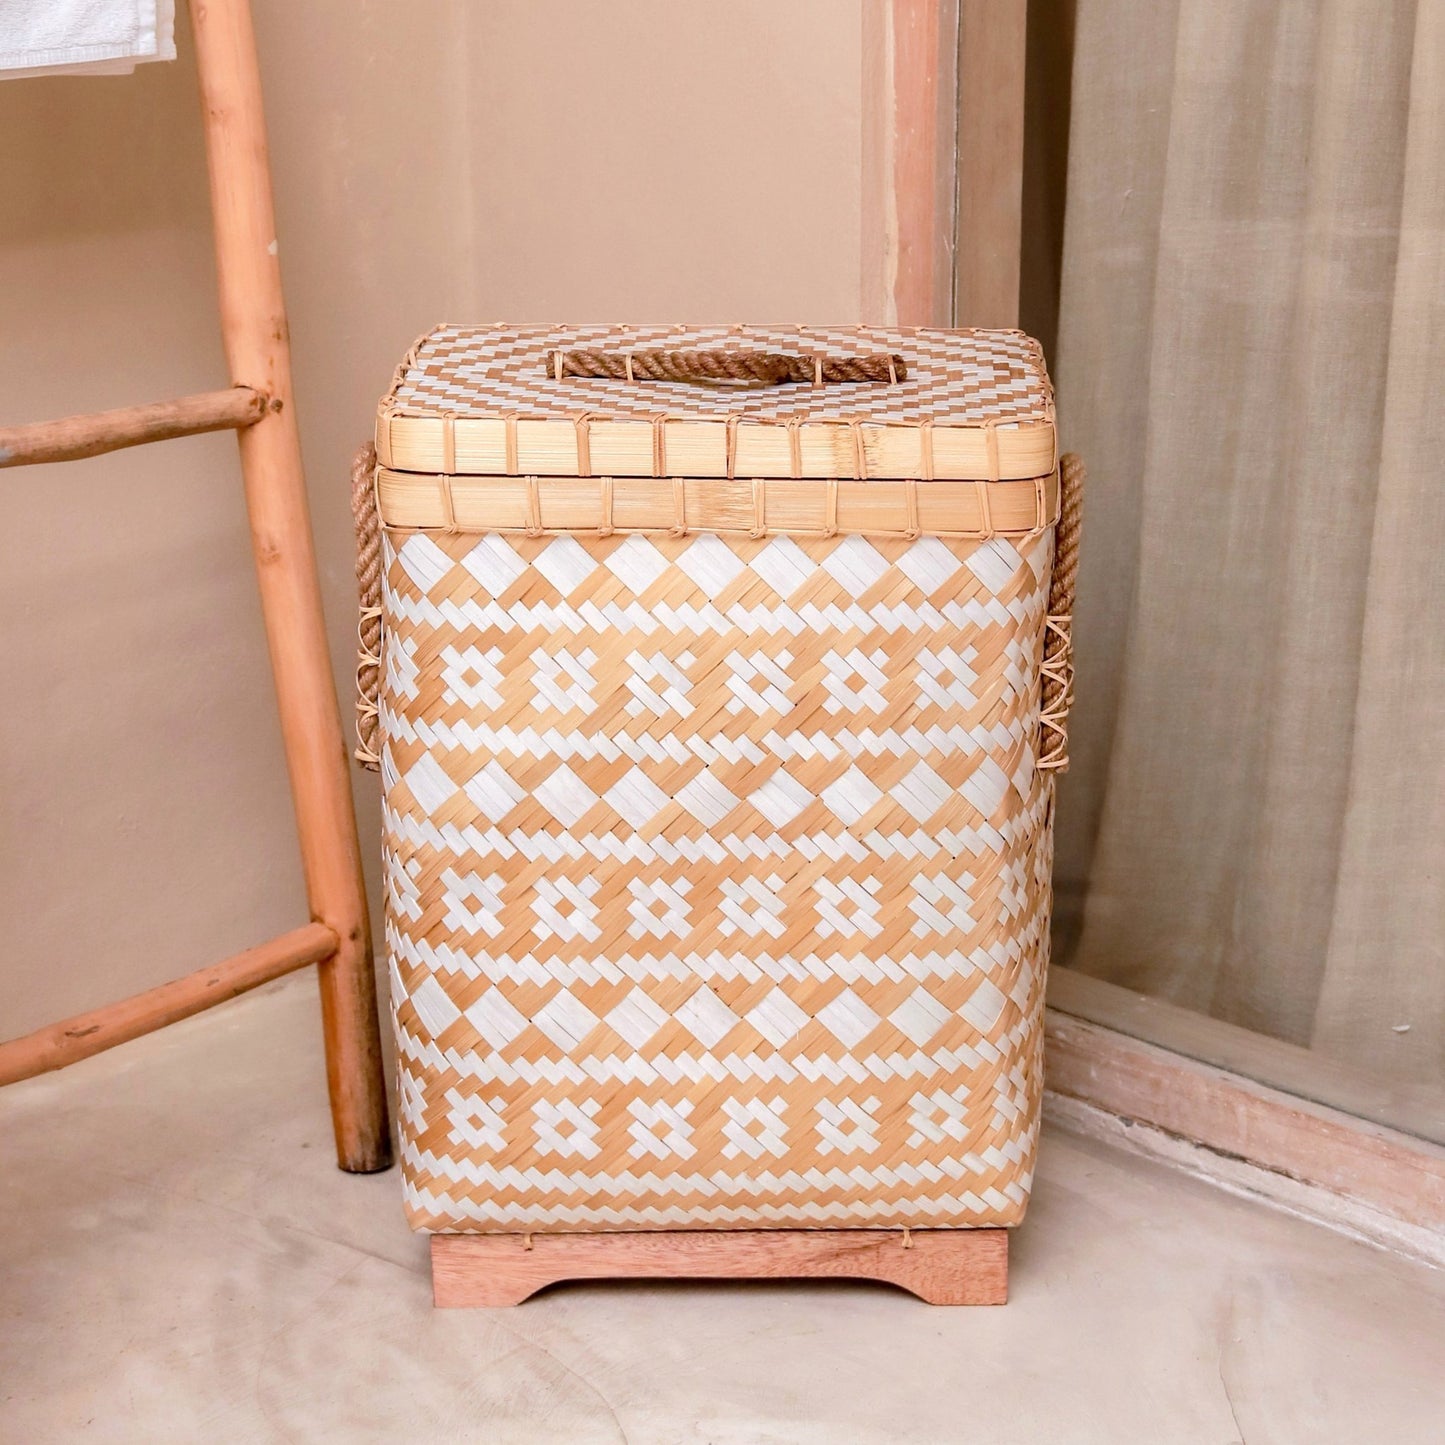 Laundry Basket with Lid DARI Handwoven from Bamboo with a Beige White Zig Zag Pattern